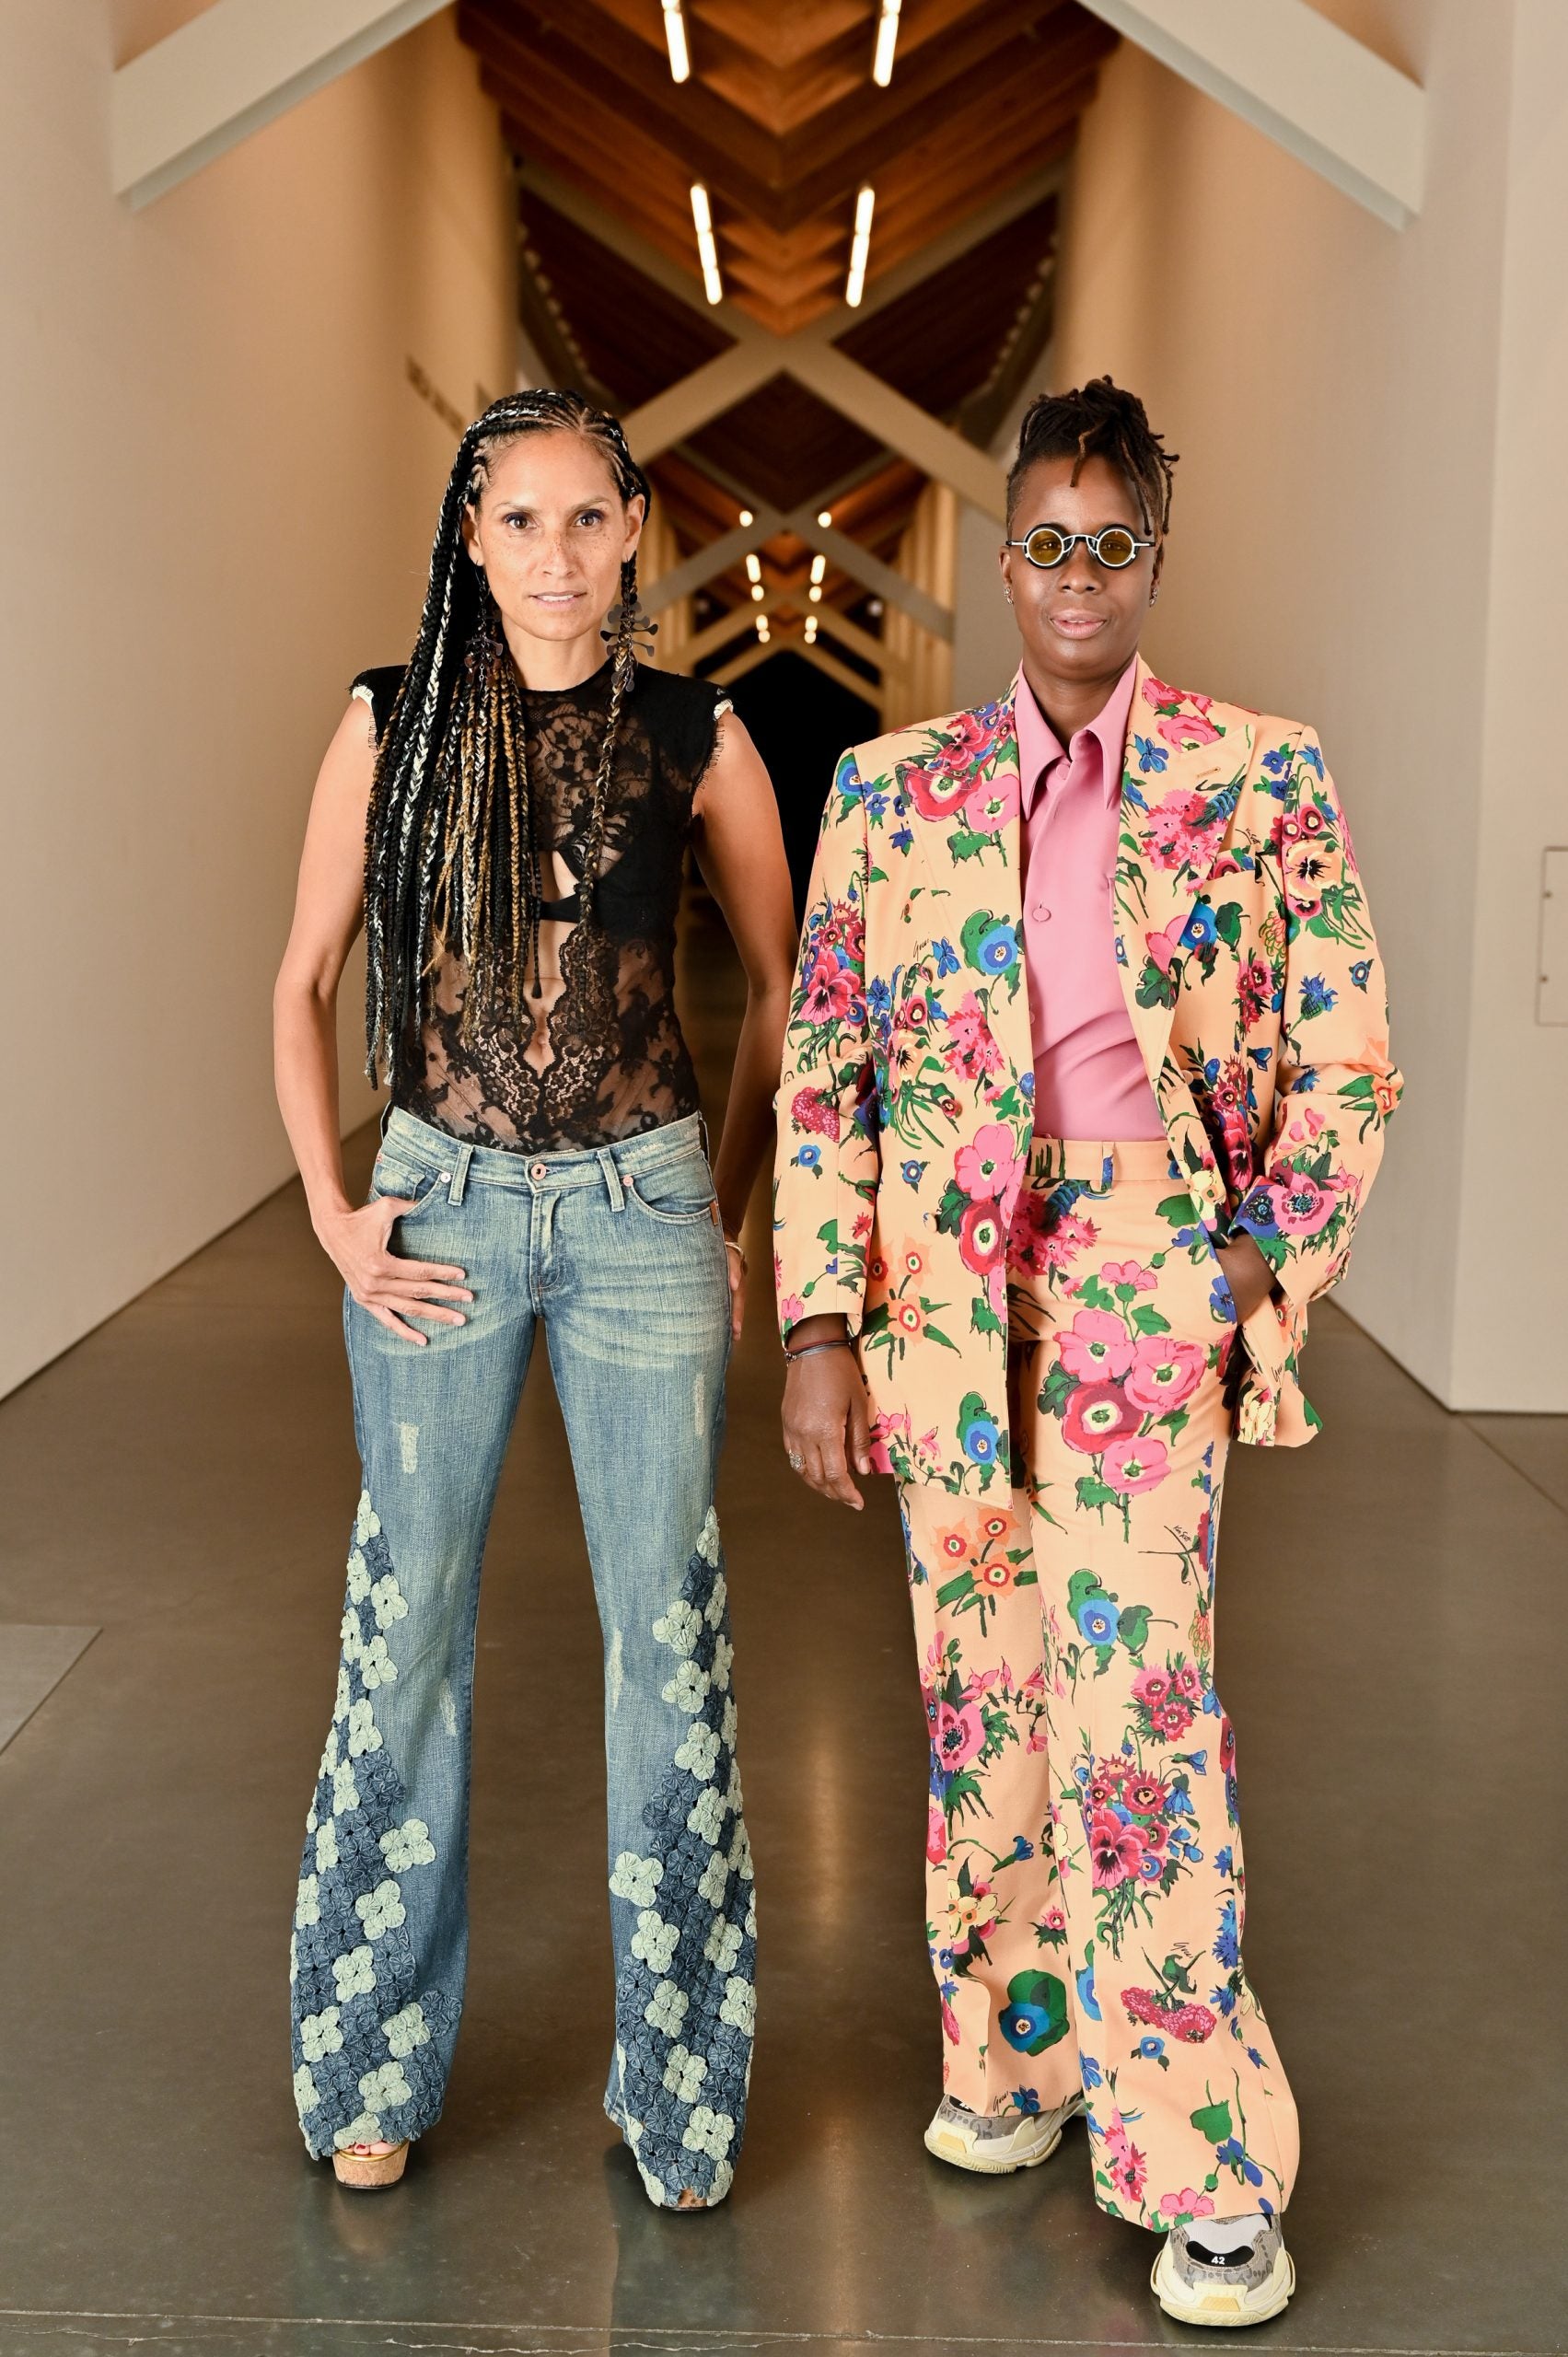 Leilah Babirye And February James “Set It Off” In A Mickalene Thomas and Racquel Chevremont Curated Exhibit